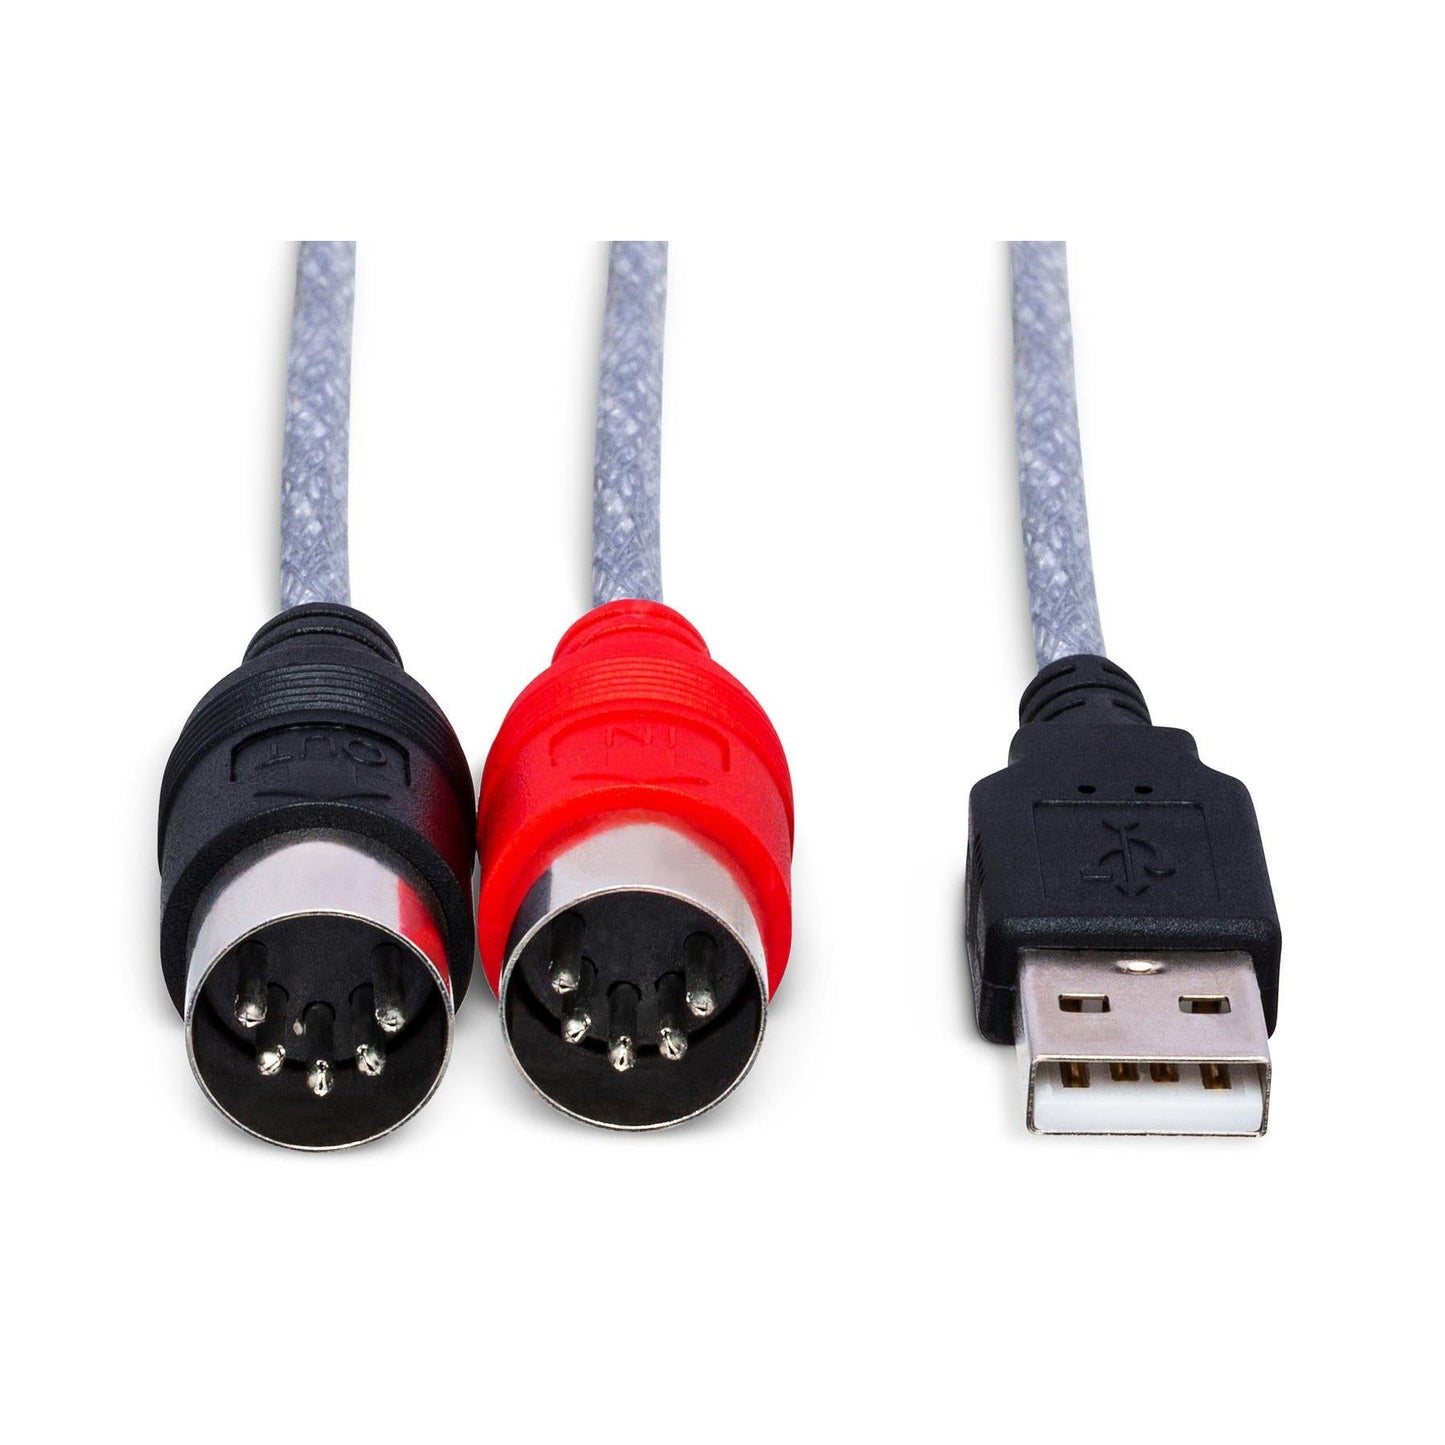 Hosa TrackLink Midi to USB A 6ft Cable USM422-Andy's Music